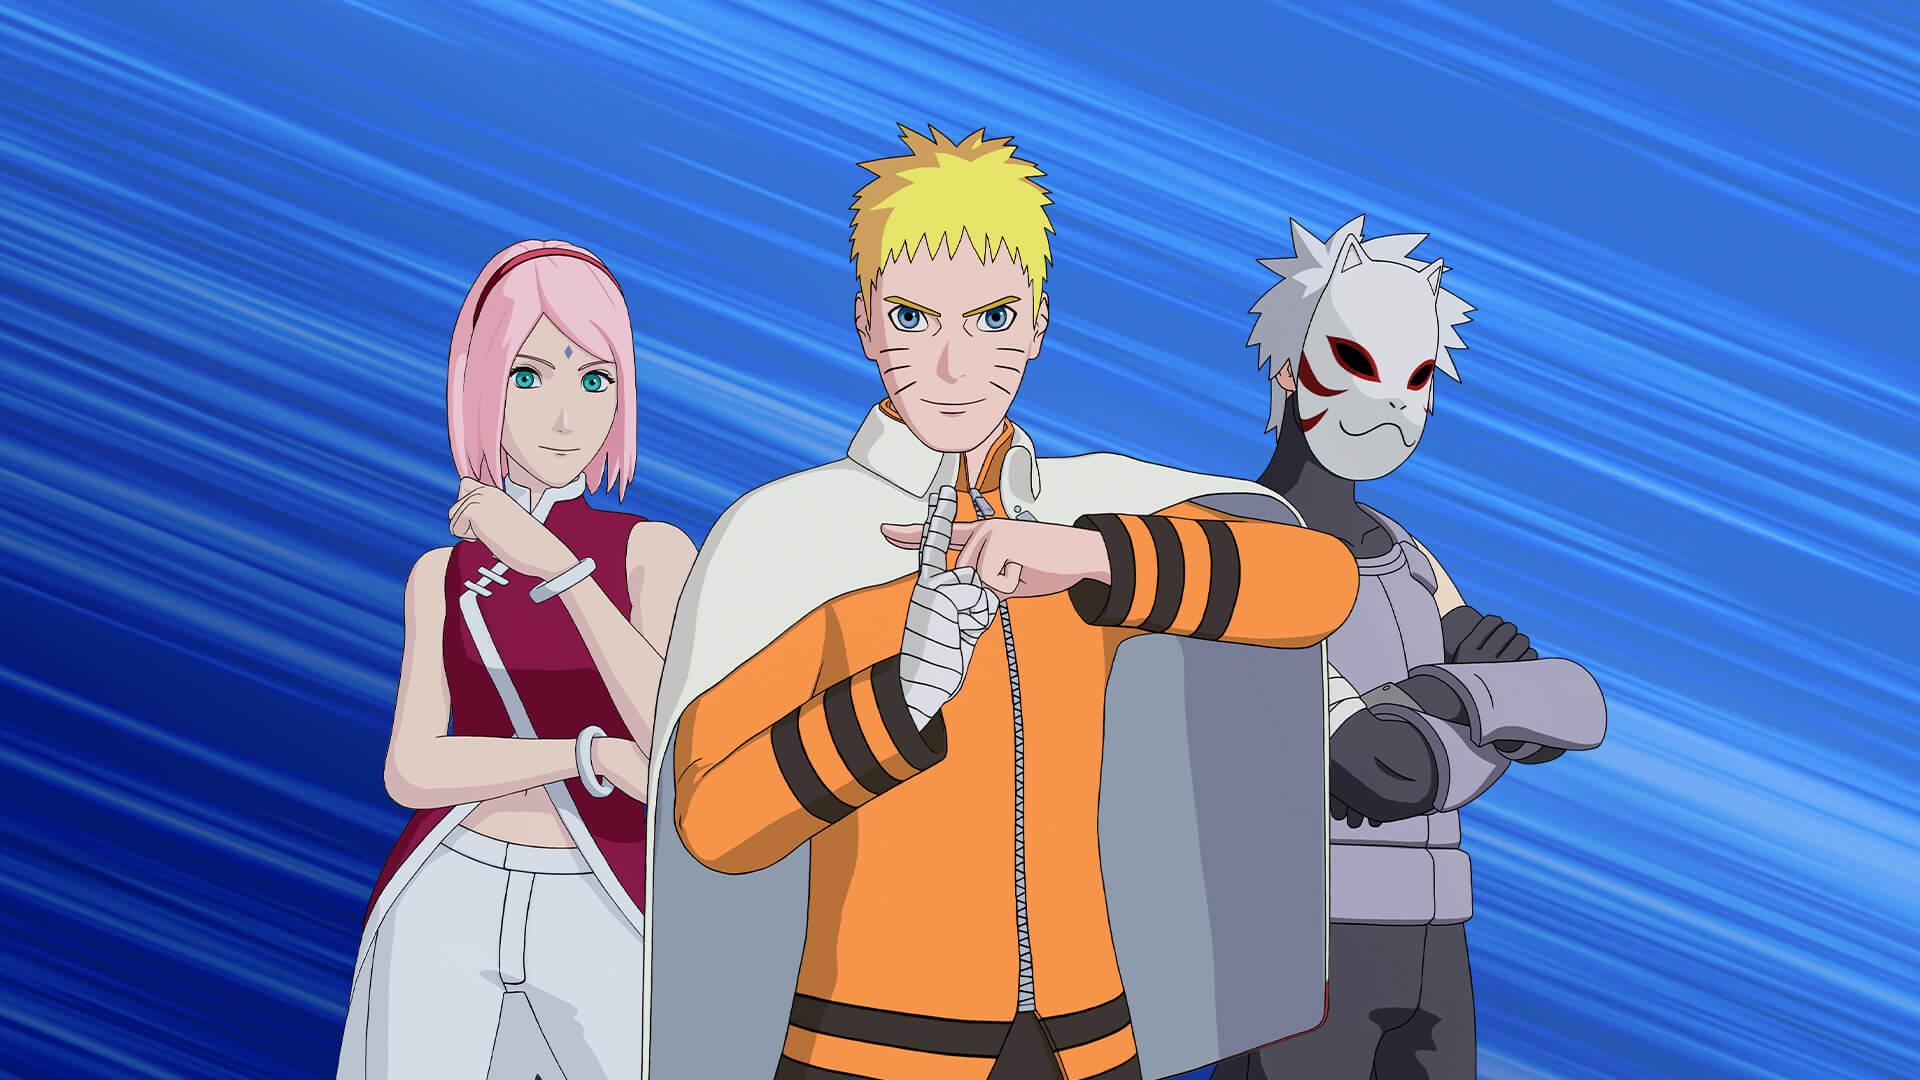 Naruto has finally arrived in Fortnite